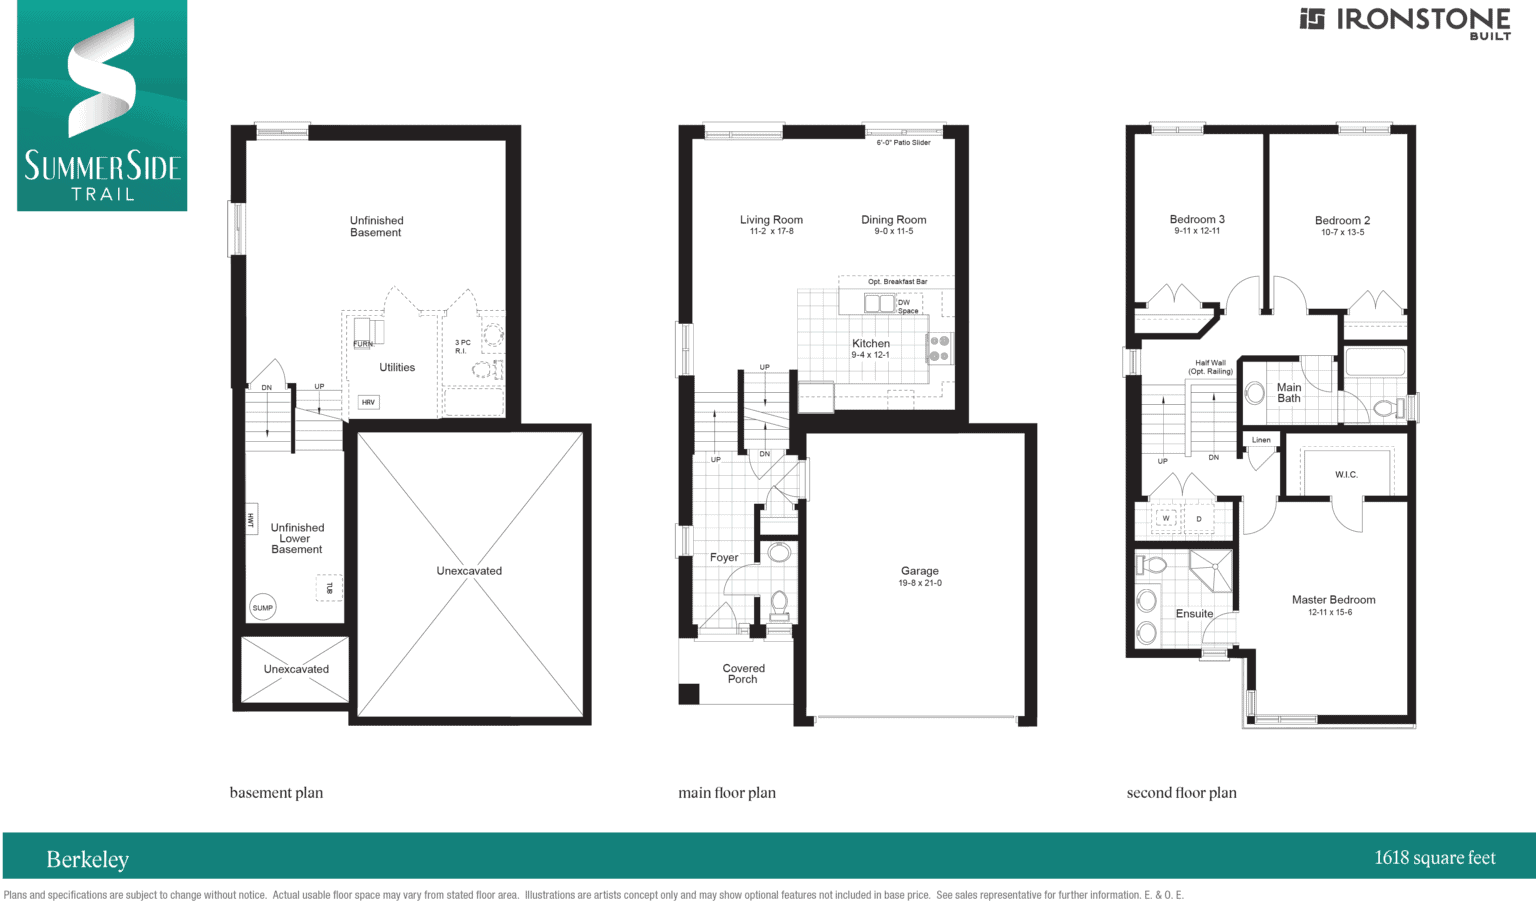  2024 Evans Blvd  Floor Plan of Summerside Trail with undefined beds